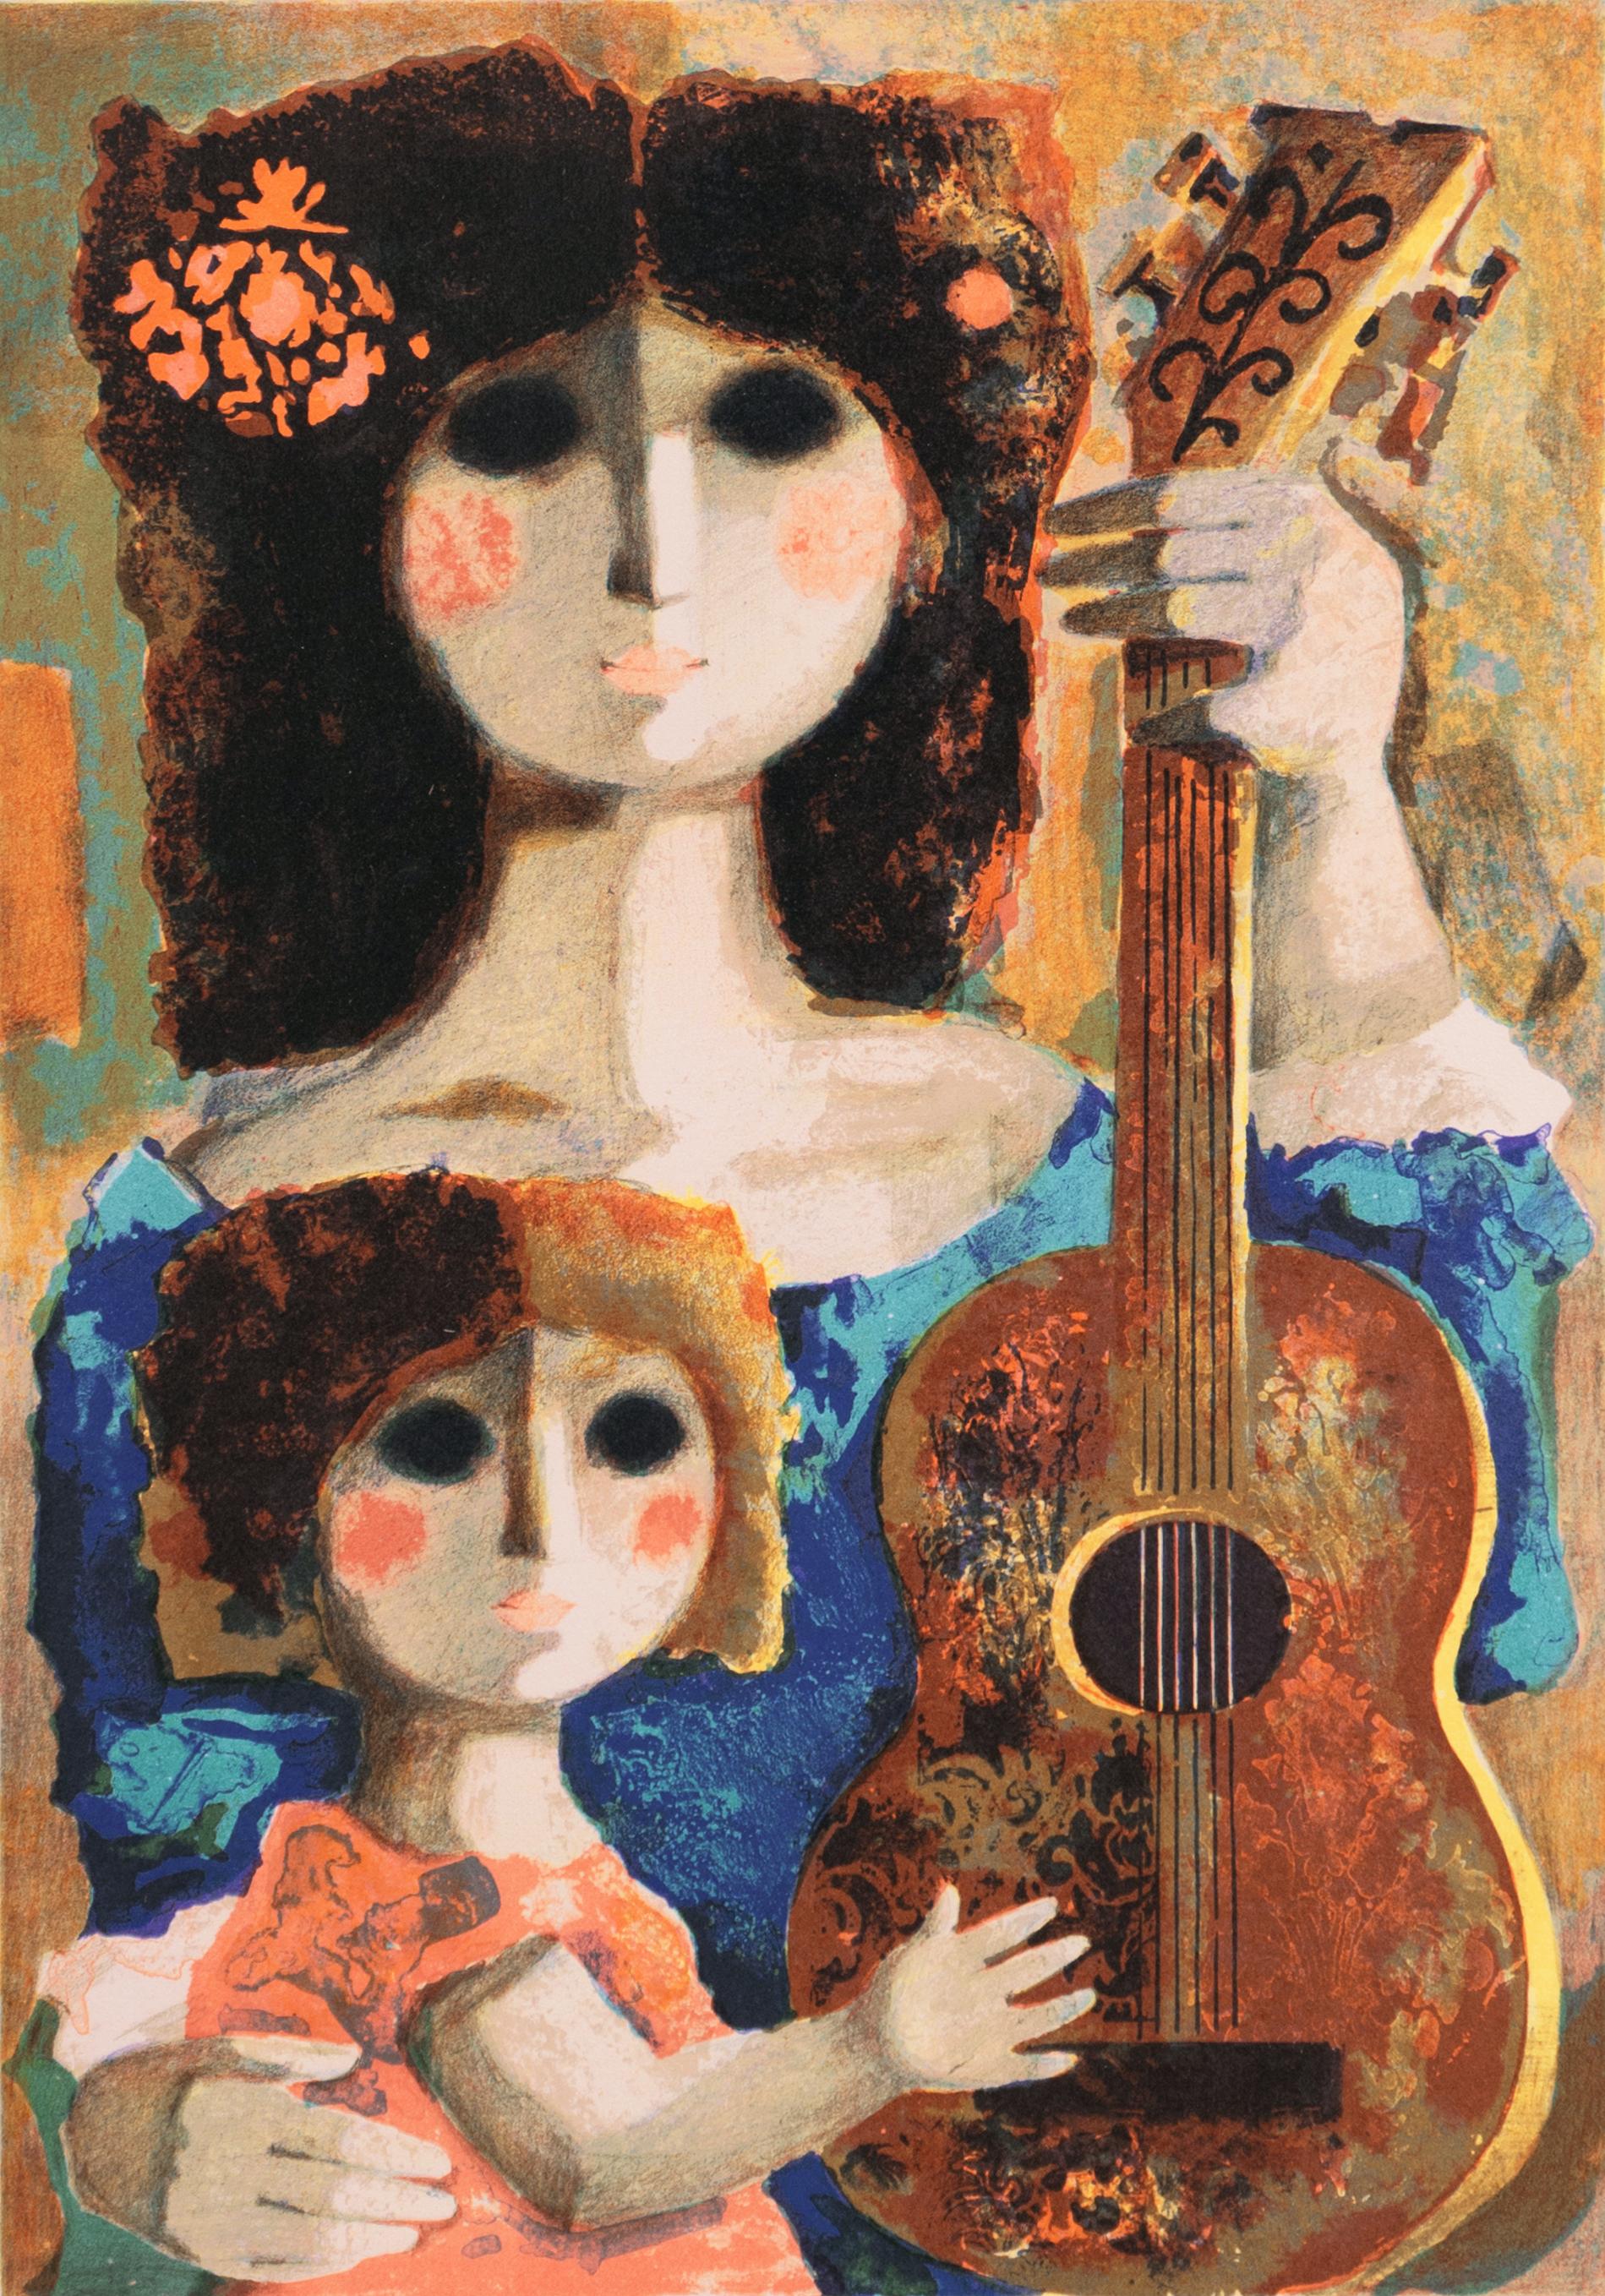 'Mother and Child with Guitar', Figural, Barcelona, Venice, Chicago, New York - Print by Jordi Pla Domènech